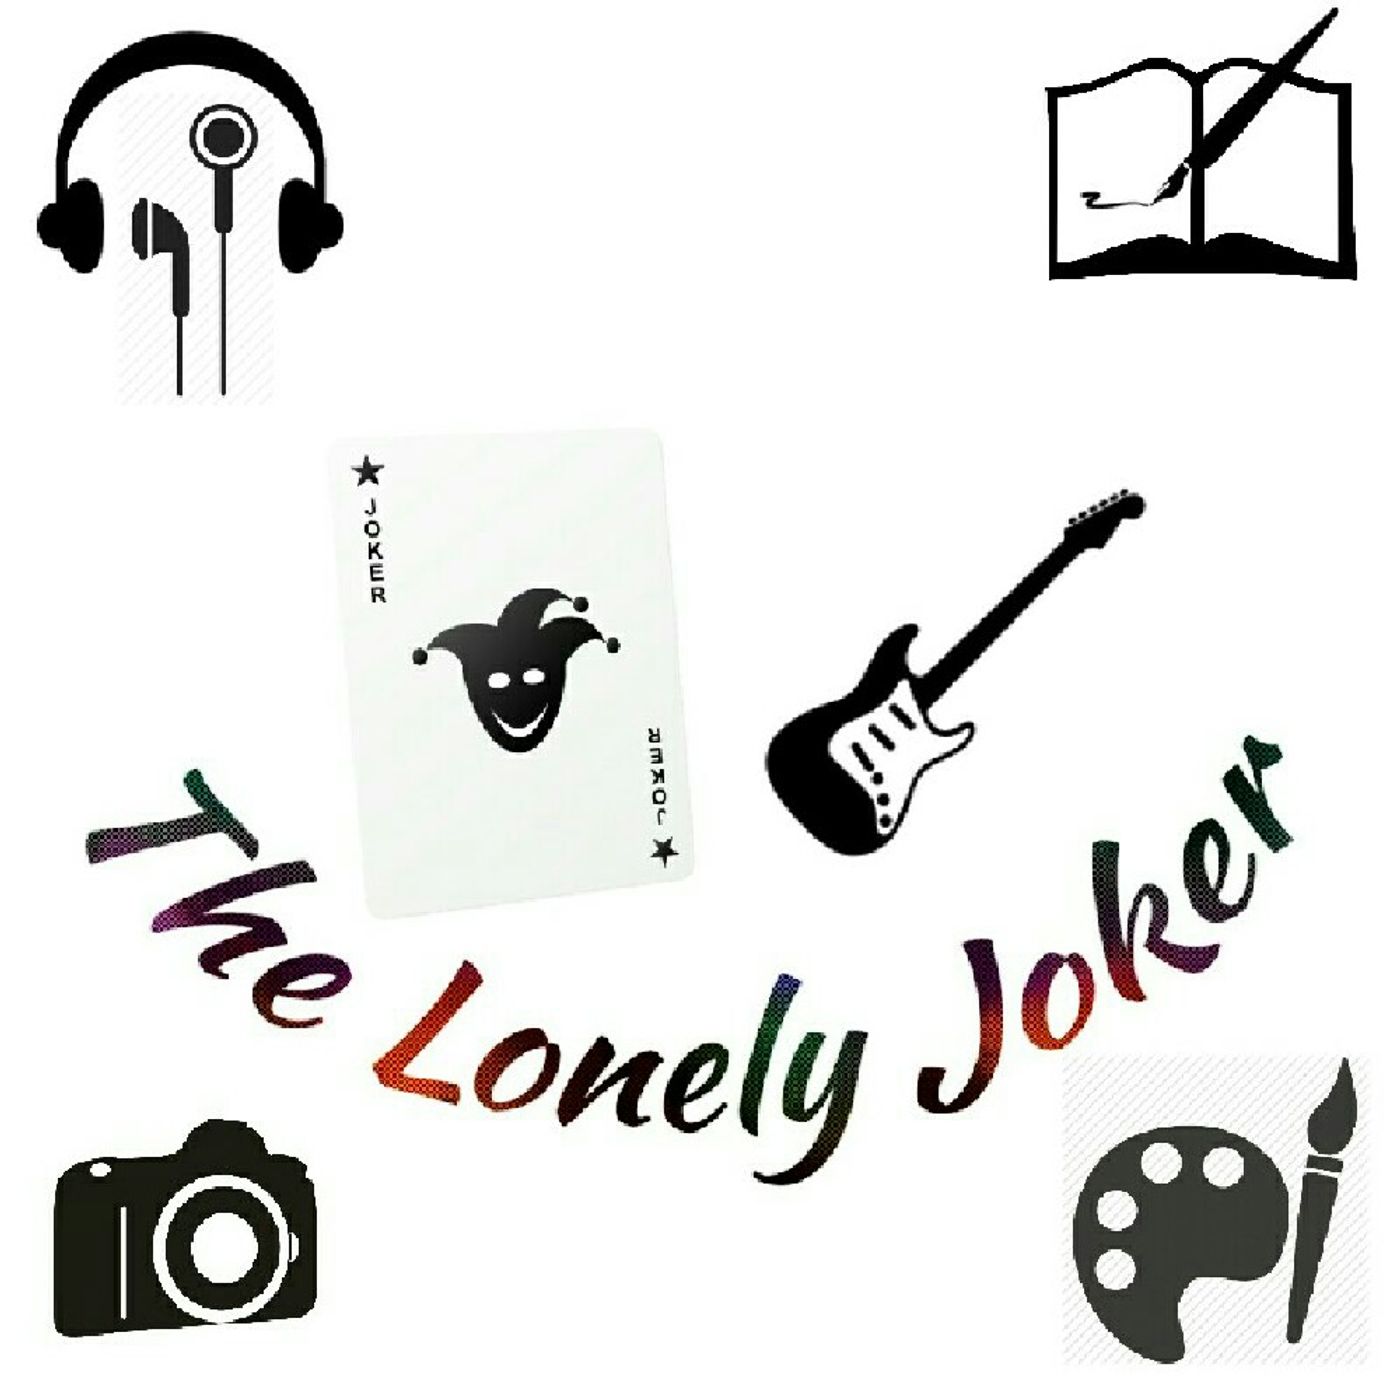 The Lonely Joker's show